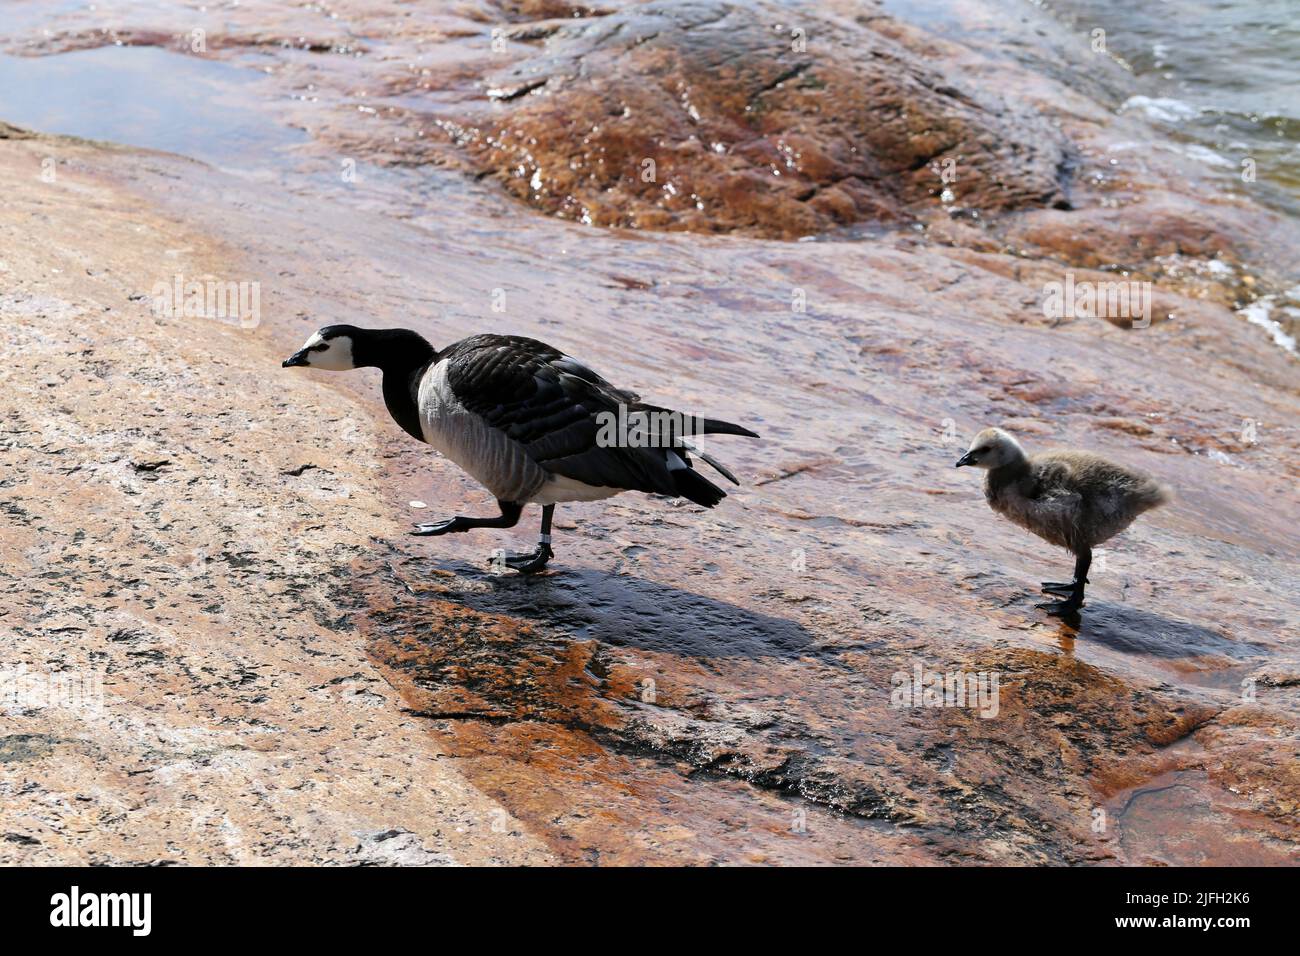 Family of geese in Eiranranta, Helsinki, Finland. One big goose and one baby goose coming from the sea to the rocks. City nature photographed. Stock Photo